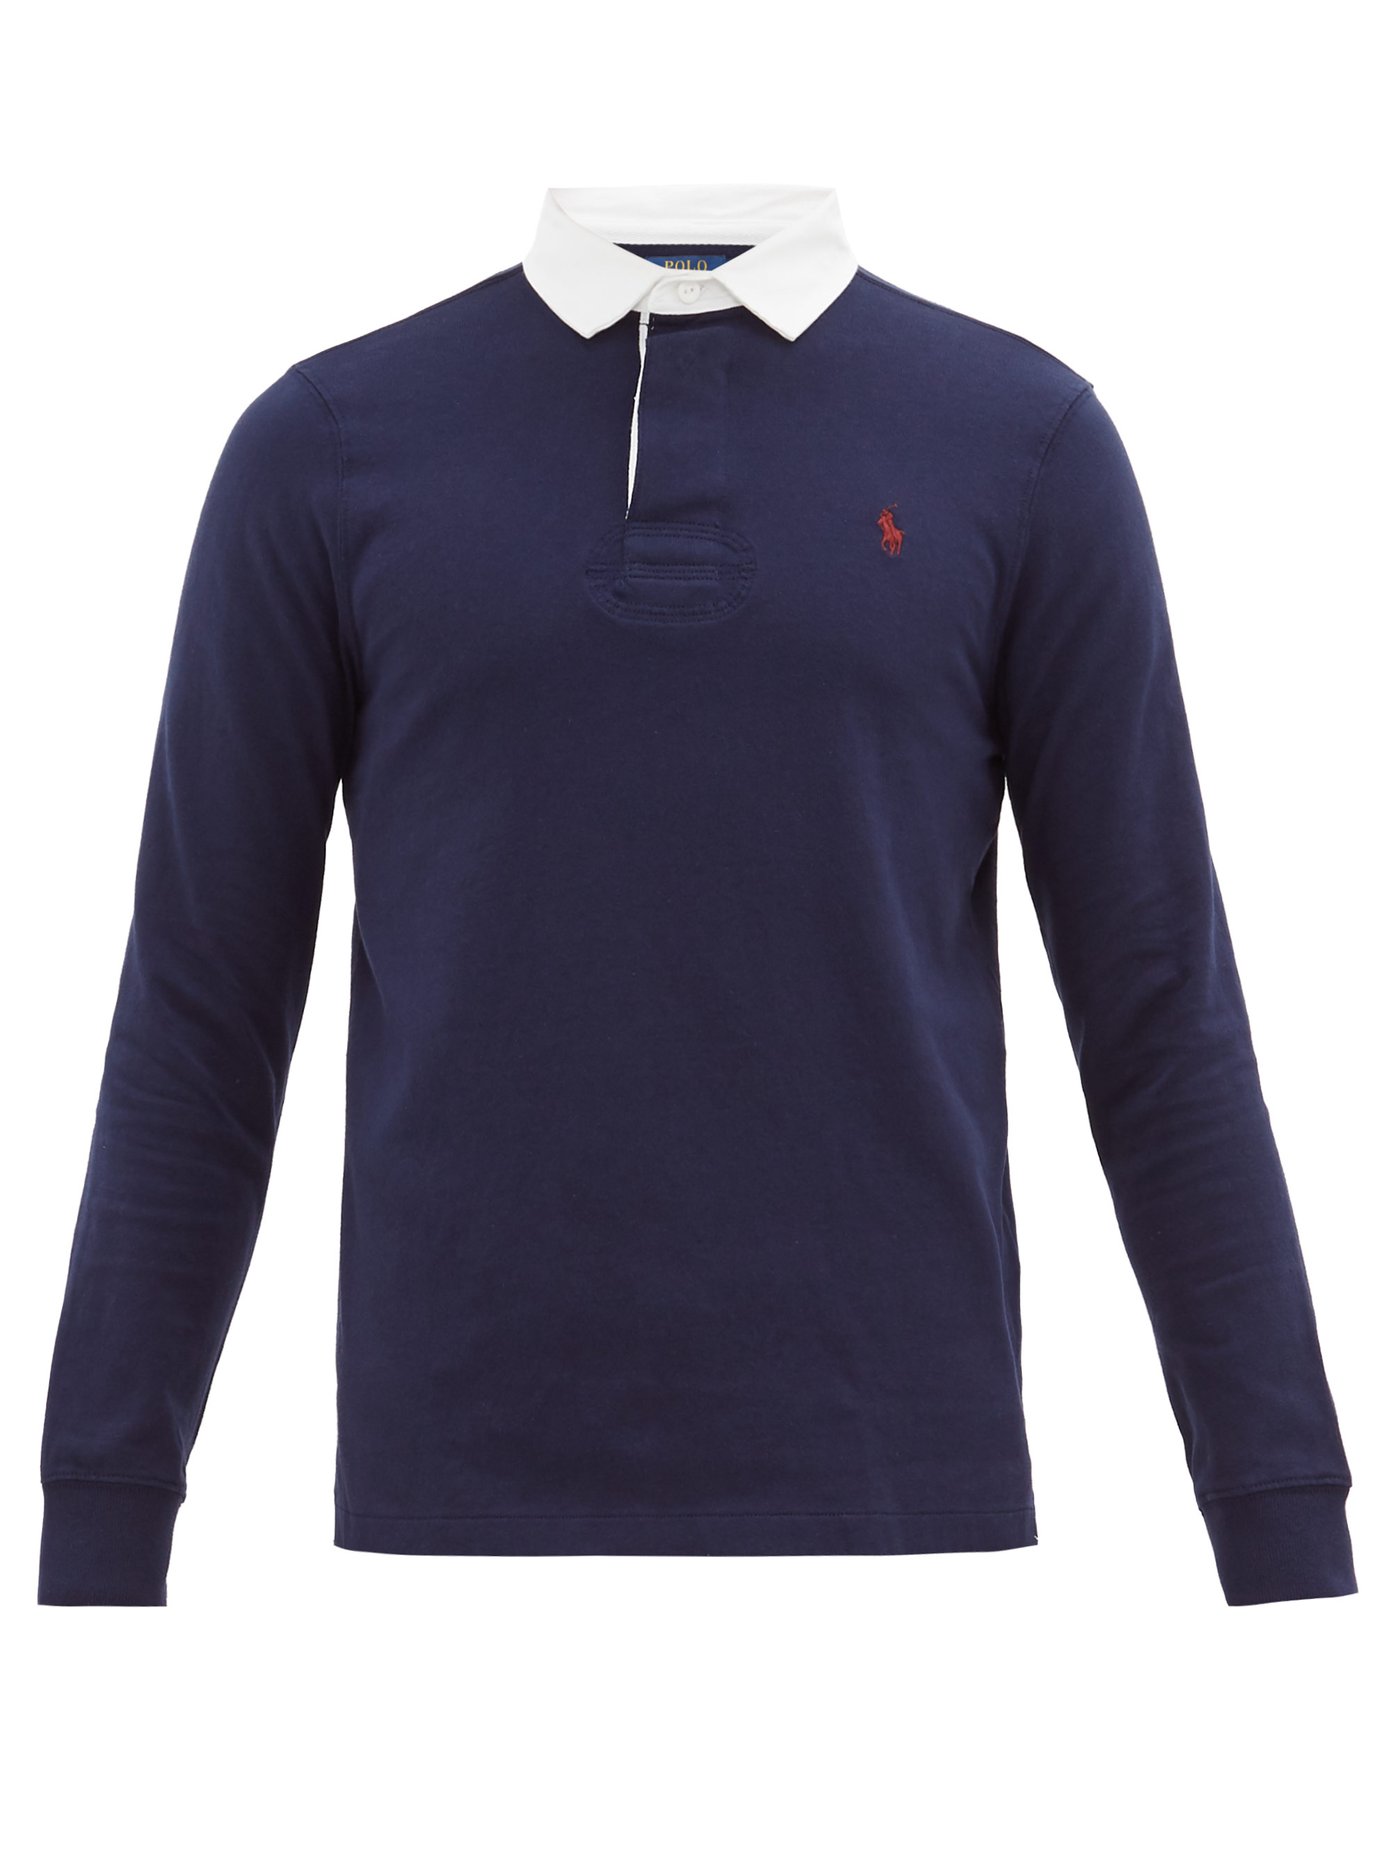 ralph lauren polo rugby jersey